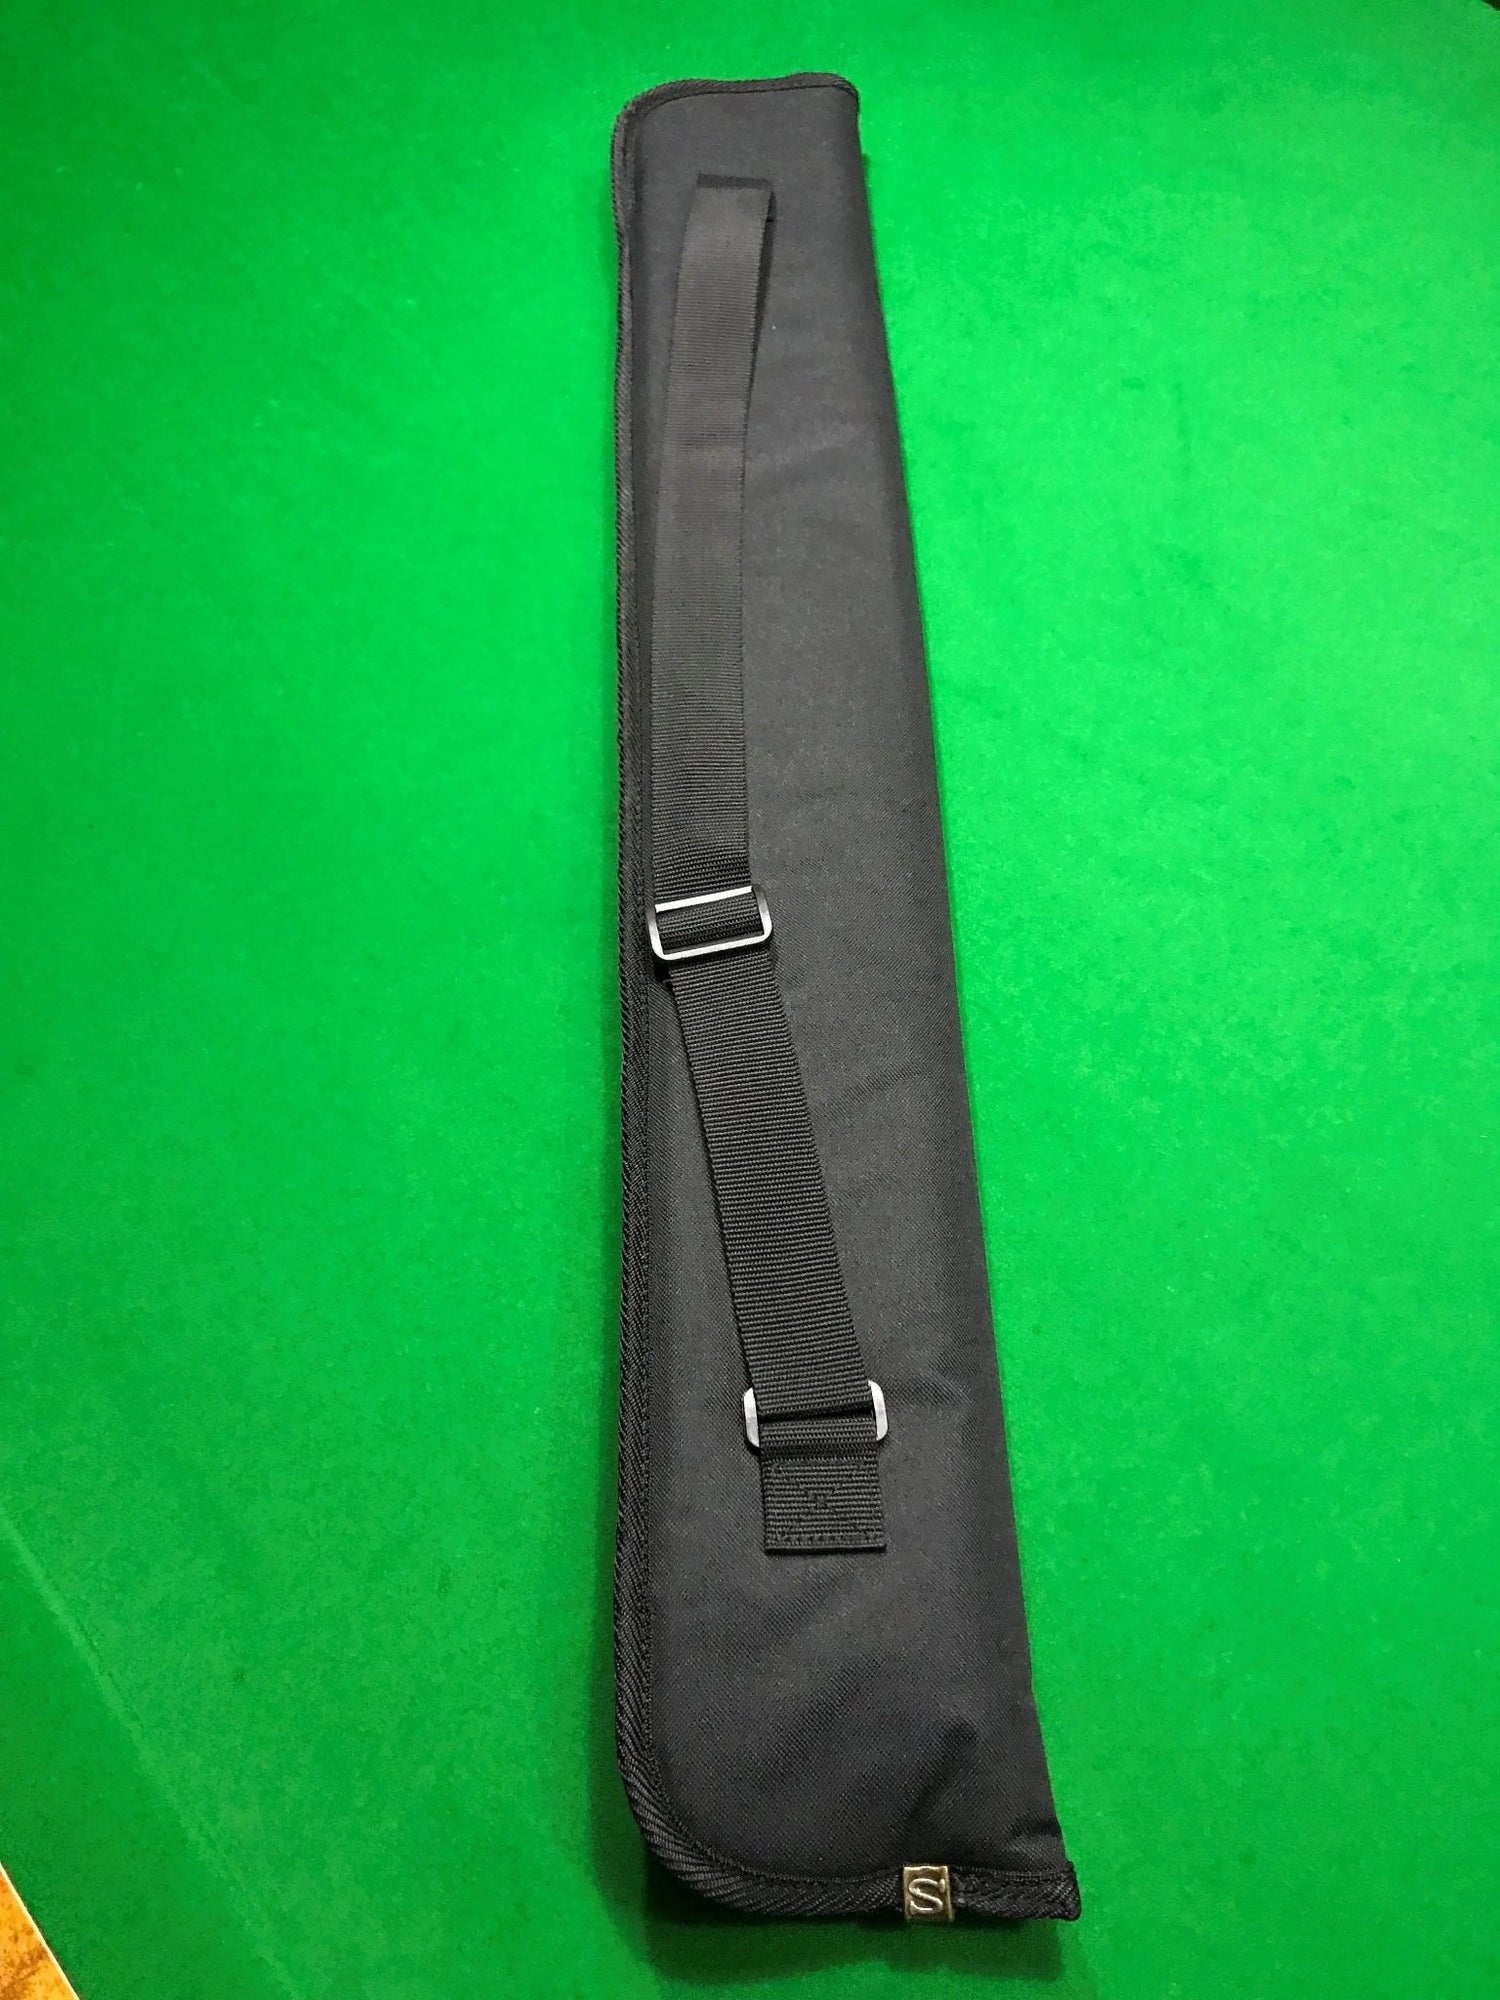 Soft 2 Piece Pool Snooker Billiard Cue Case Black with Brown Suede - Q-Masters